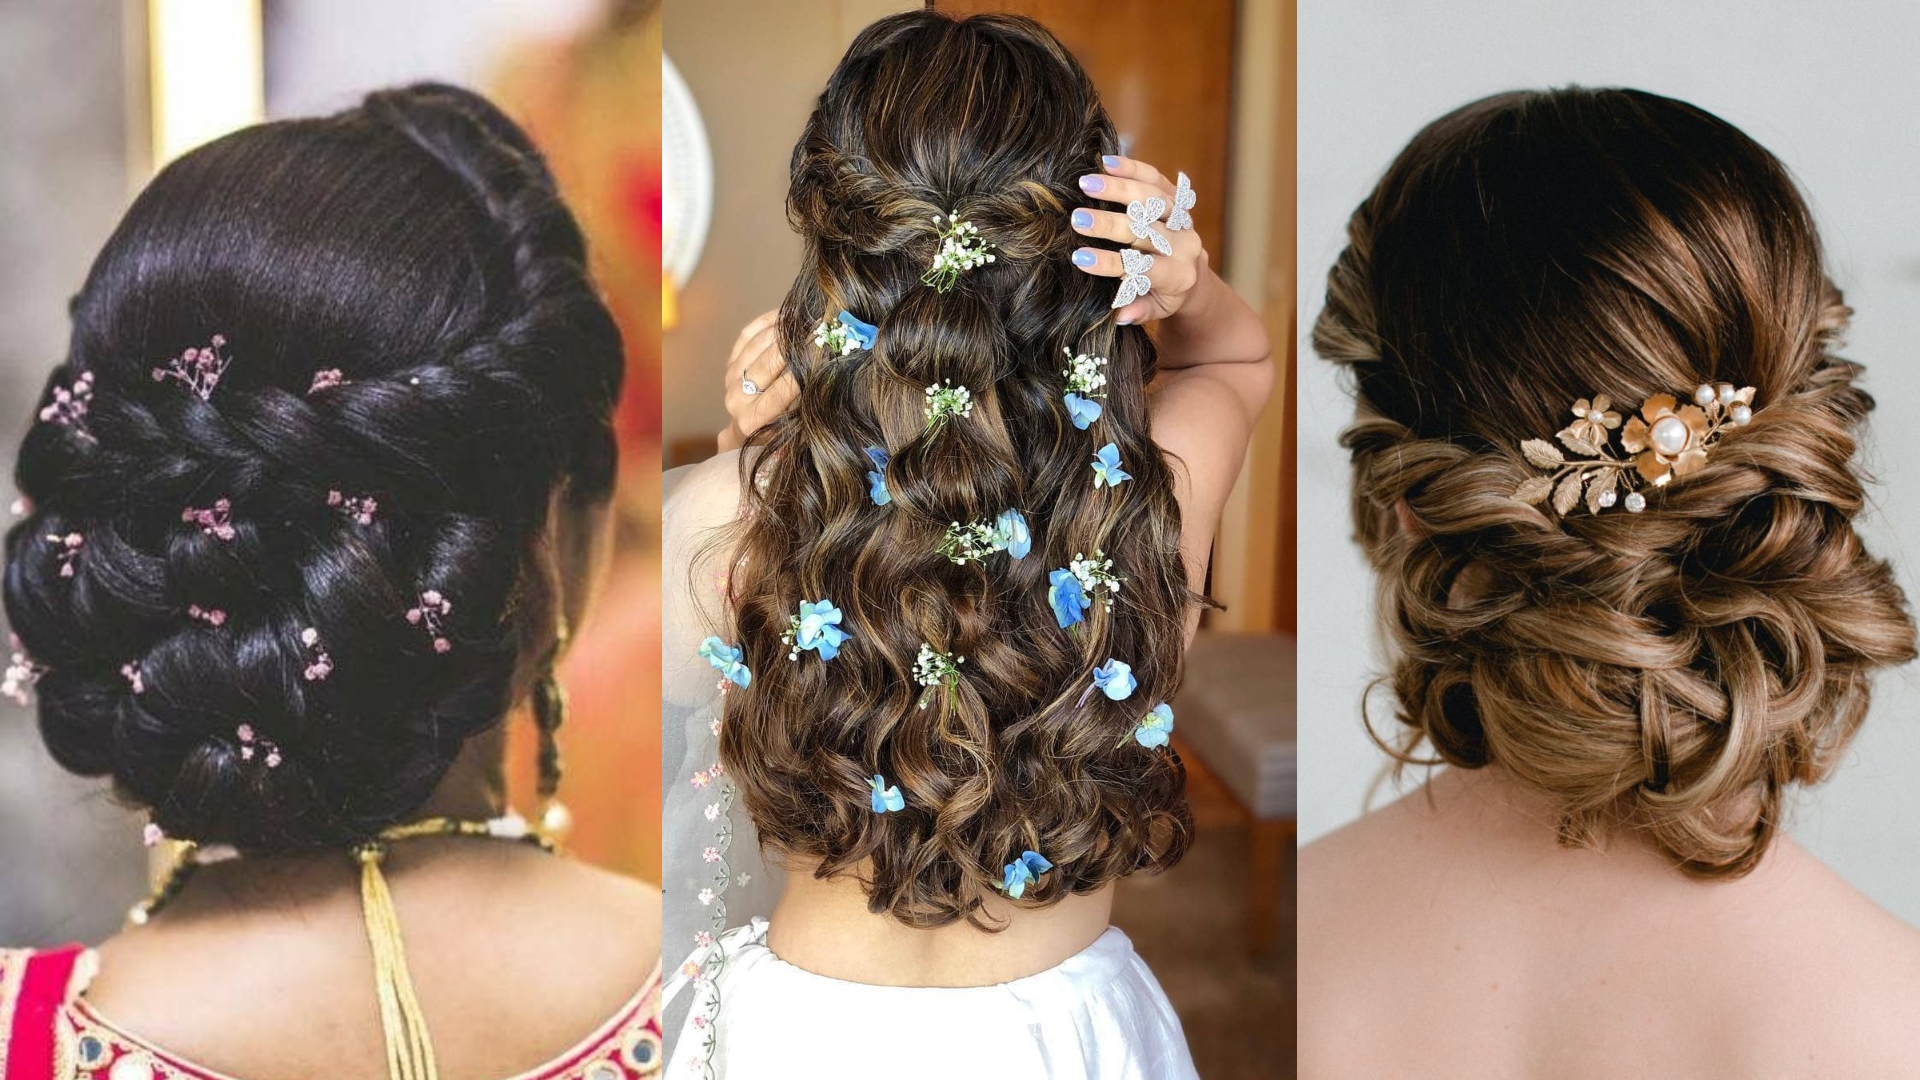 10 easy and classy French braid hairstyles